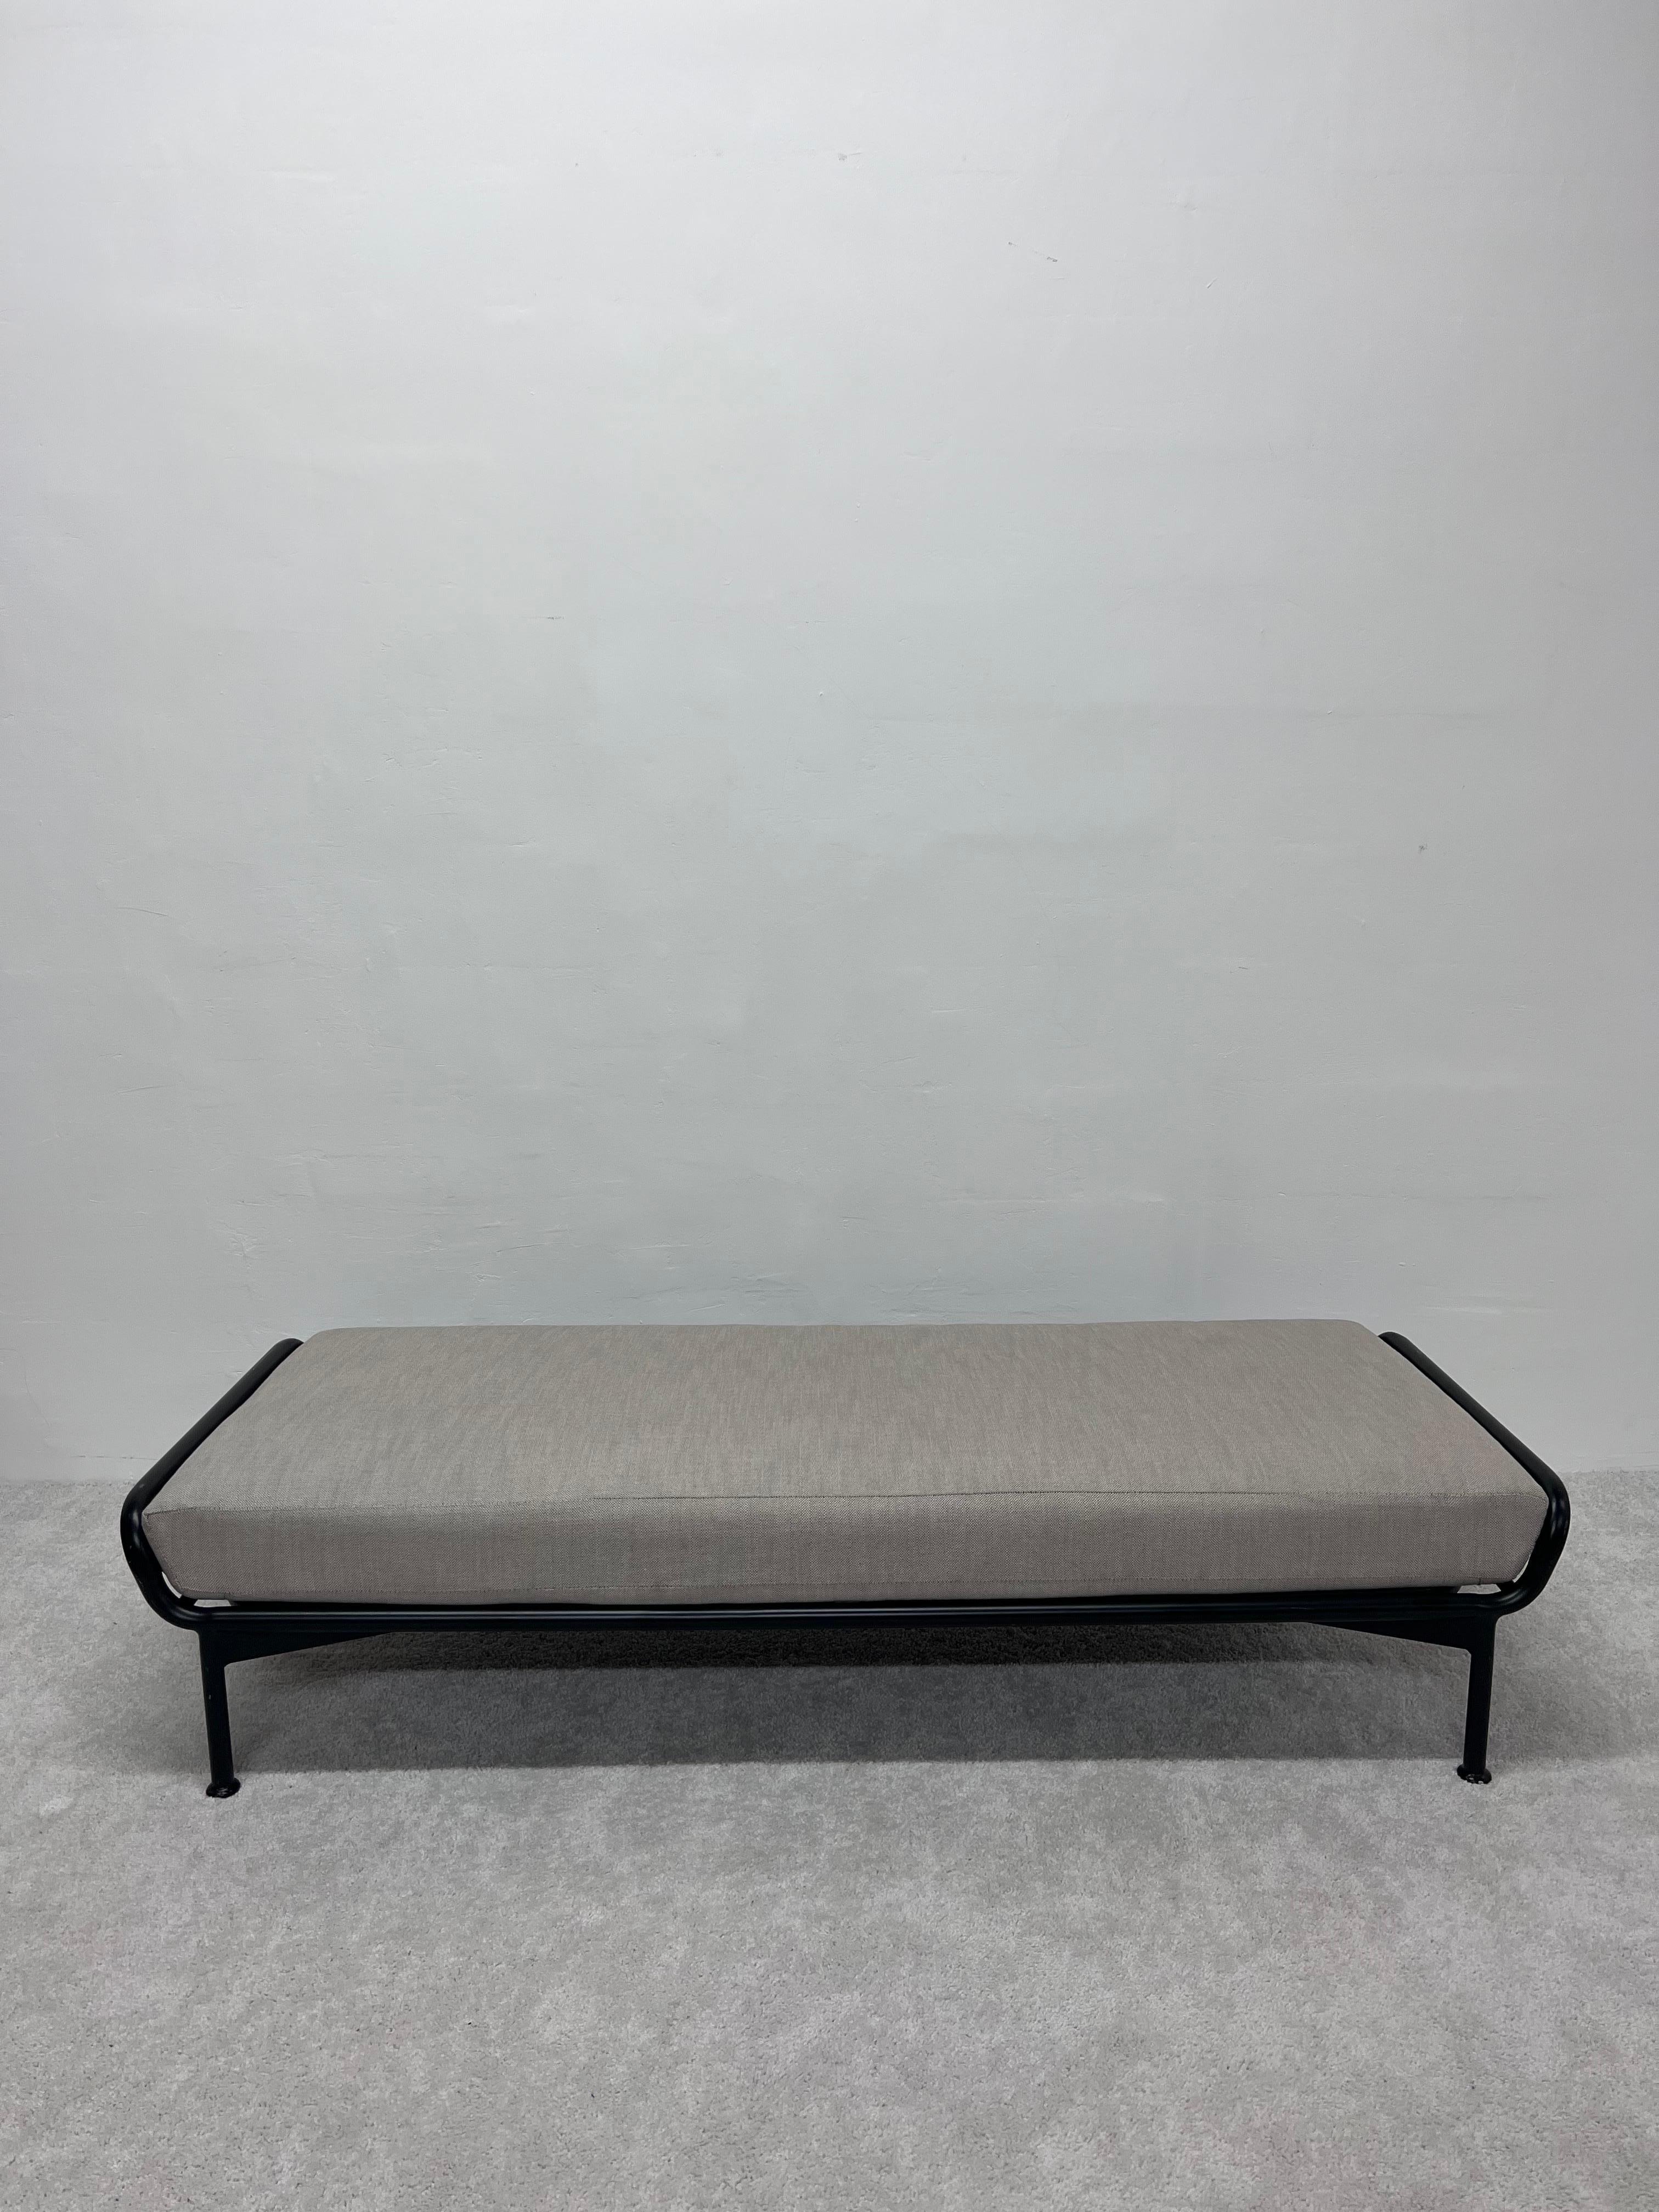 Black lacquered aluminum frame daybed or bench with light gray outdoor cushion and sun cloth straps designed by John Caldwell for Brown Jordan.